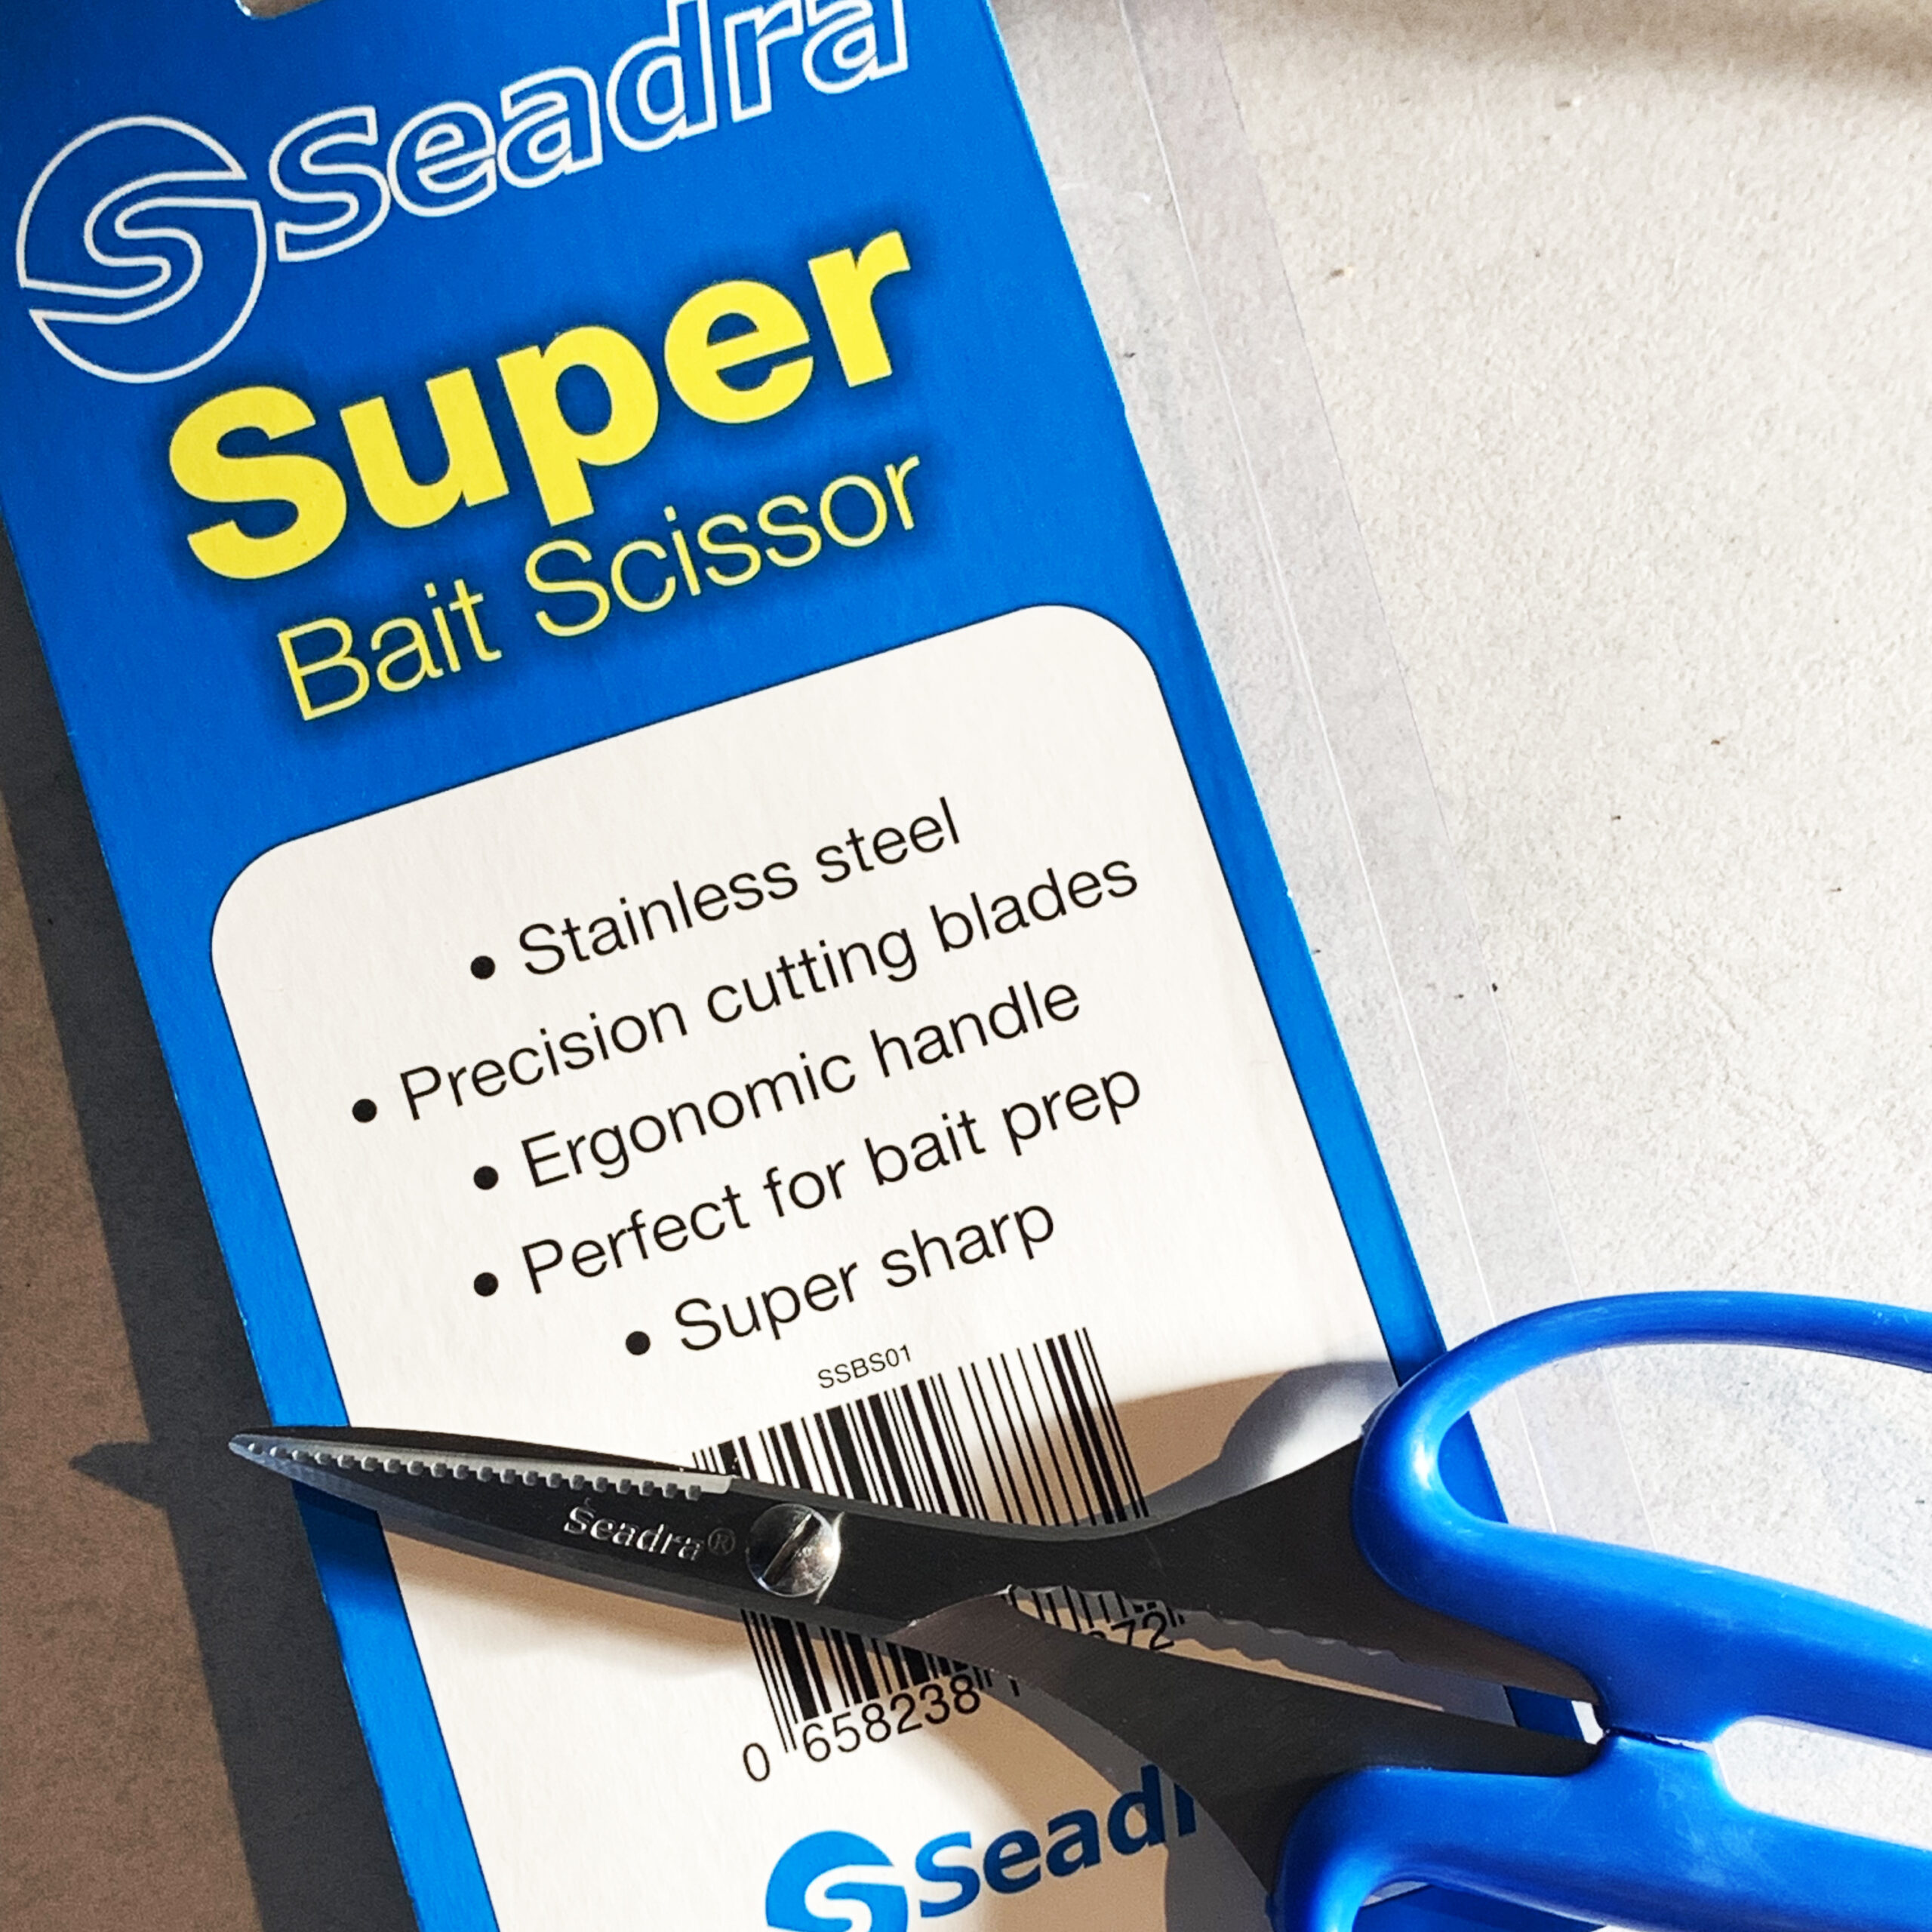 NEW- Seadra Super Bait Scissors- Initial Thoughts. By Jansen Teakle. -  Veals Mail Order